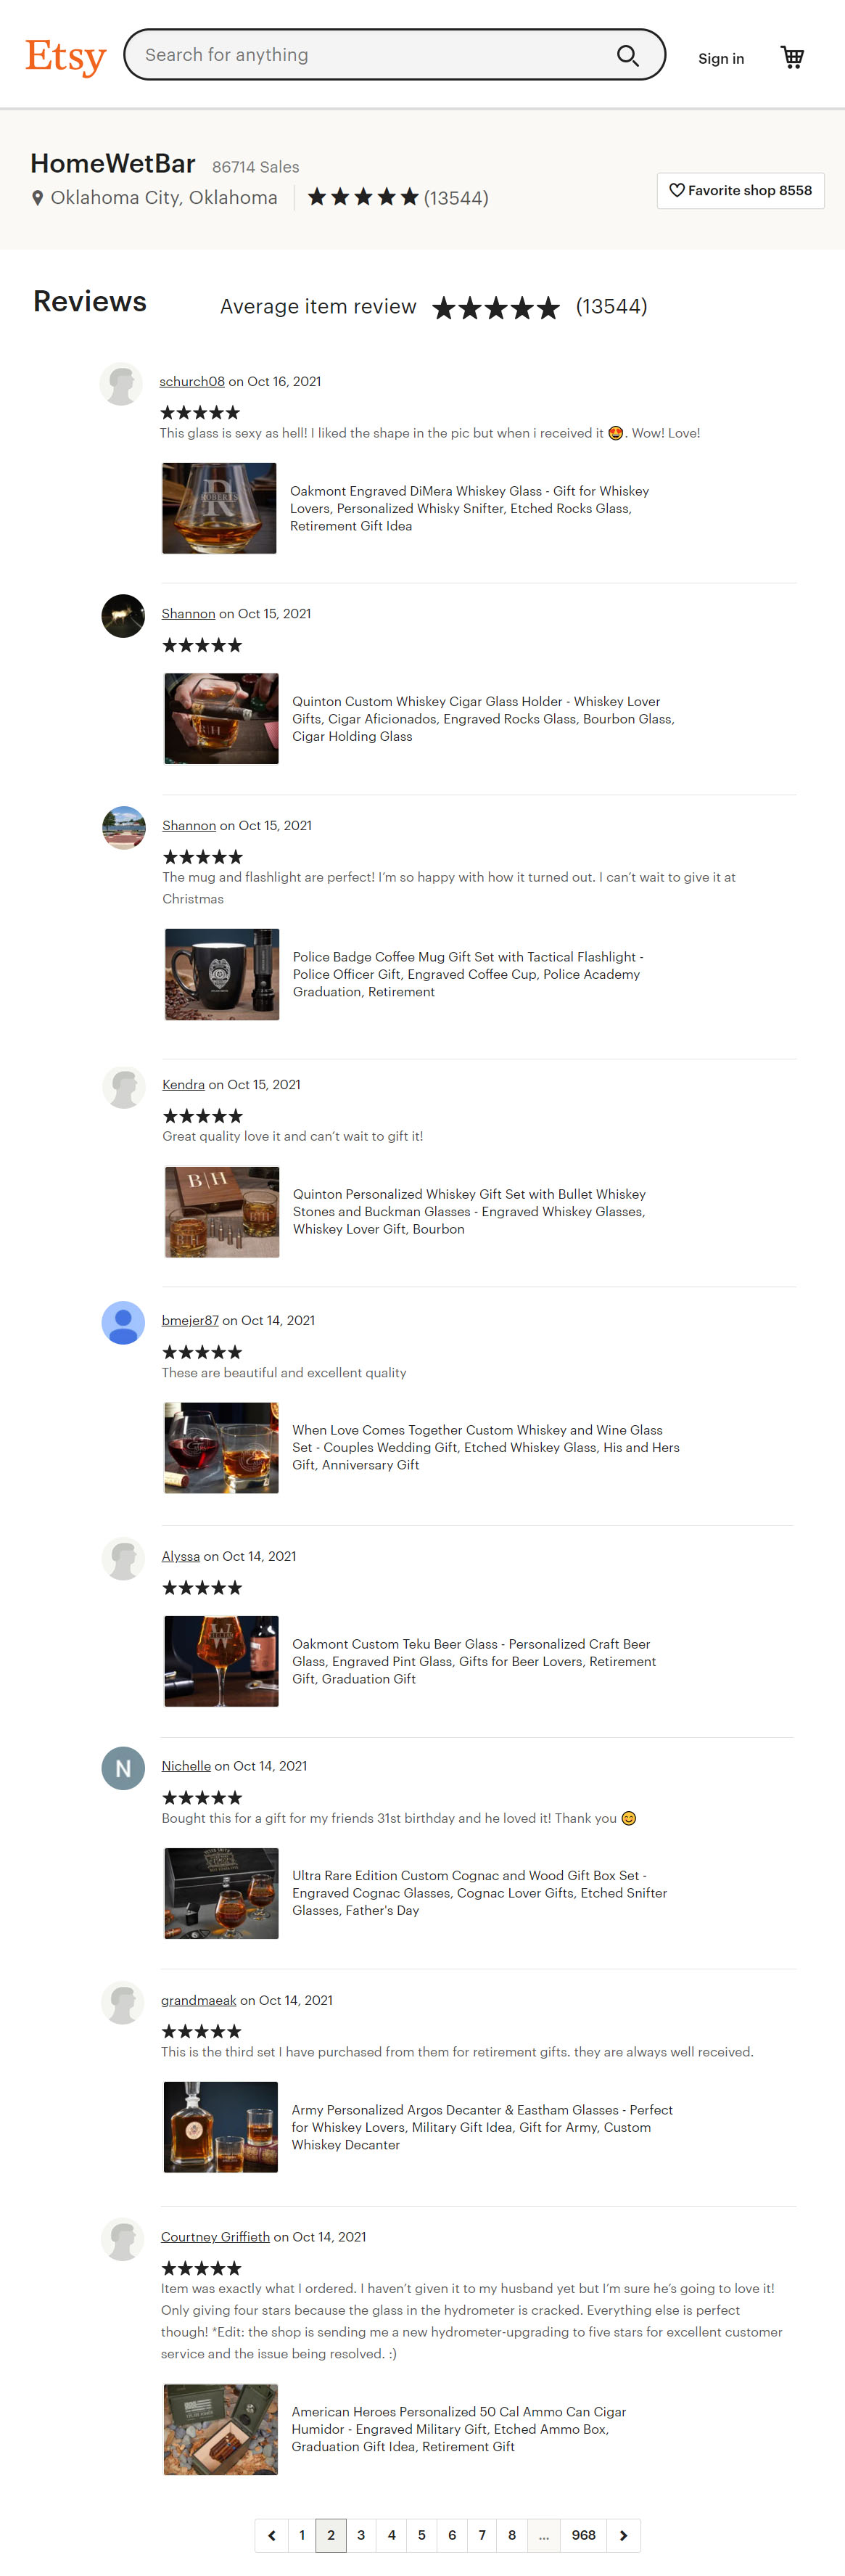 homewetbar reviews rated by real customers on Etsy